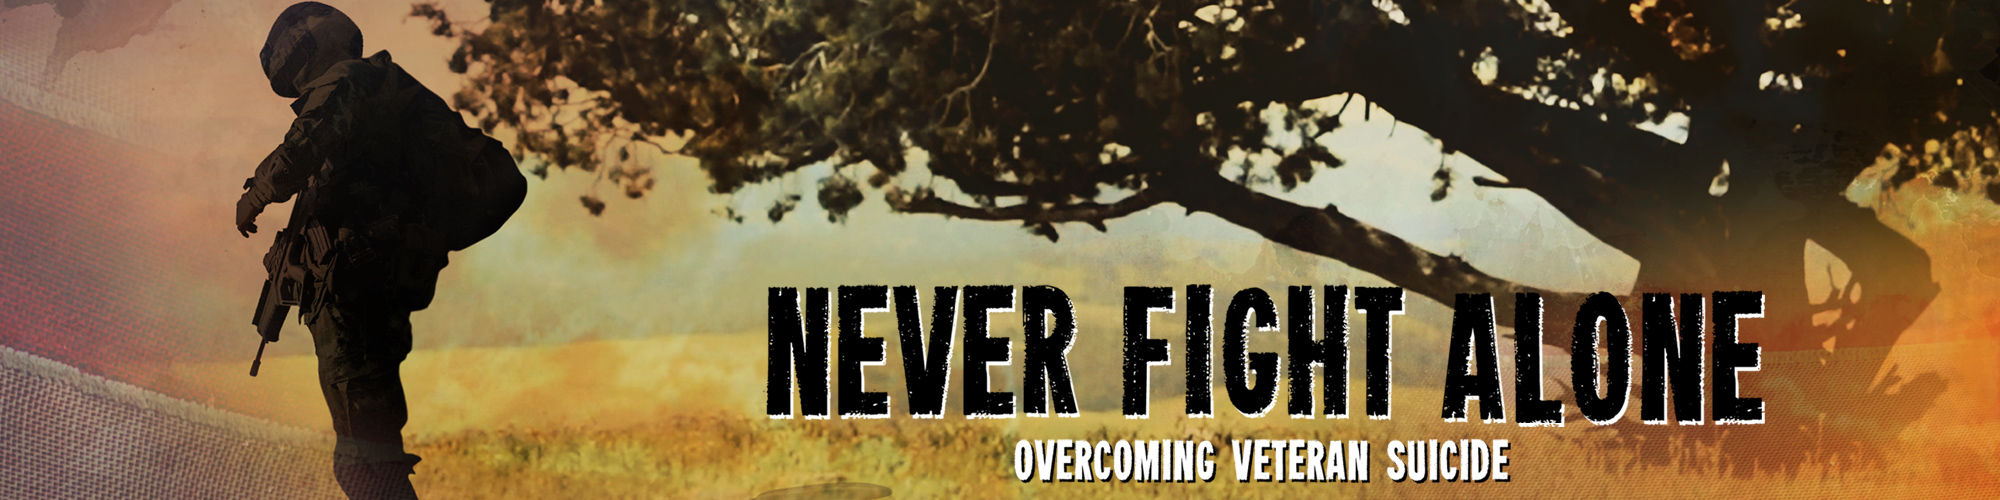 Never-Fight-Alone_banner